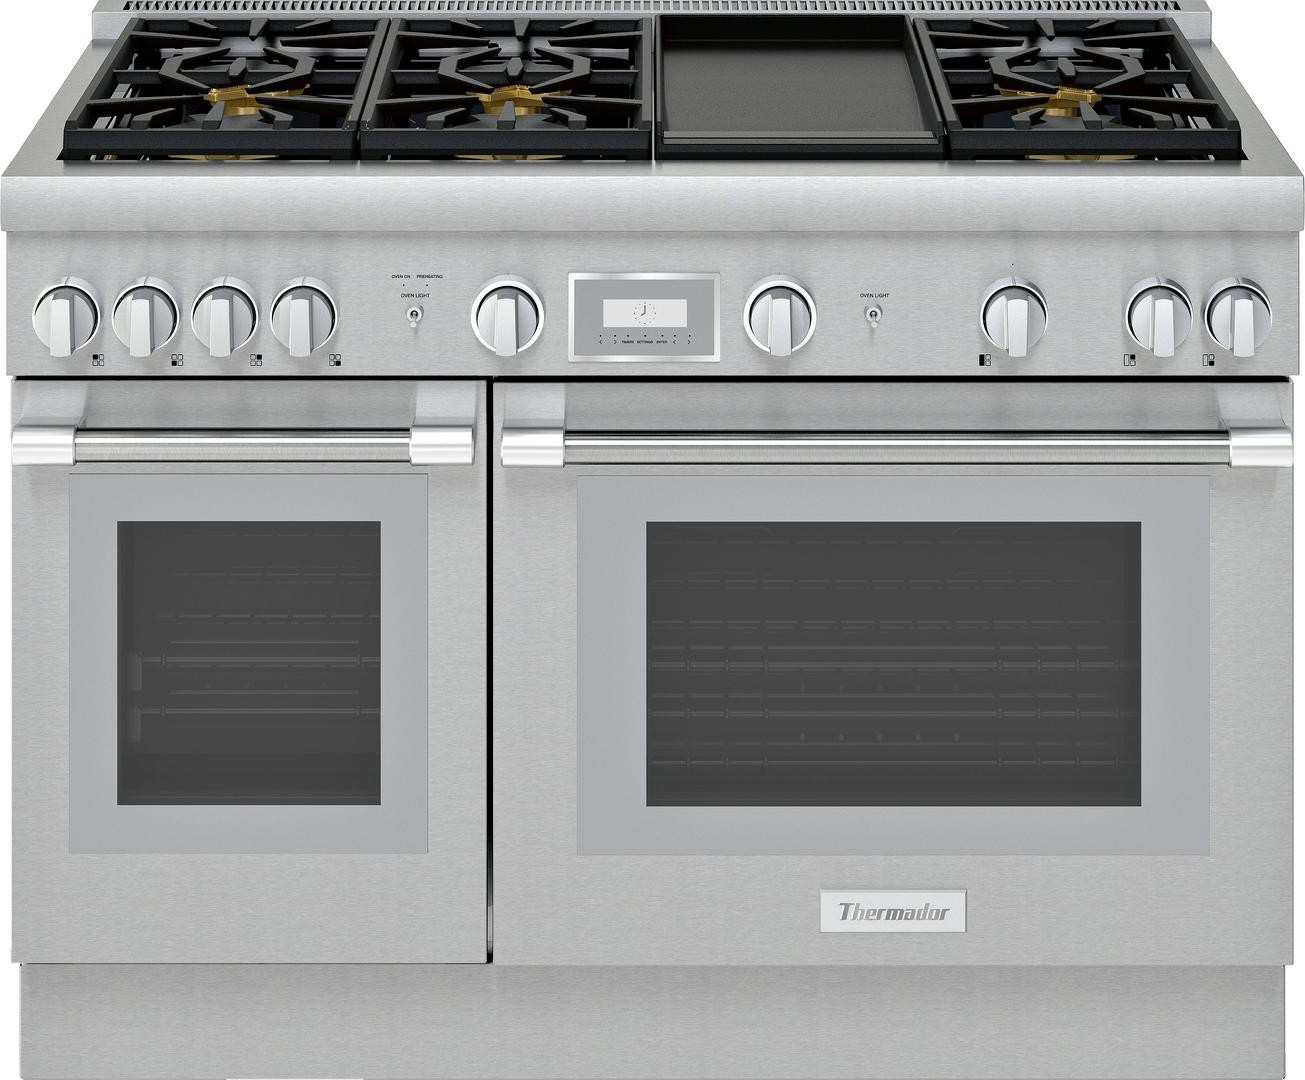 Thermador Pro Harmony Professional 48 Freestanding Natural Gas Range PRG486WDH